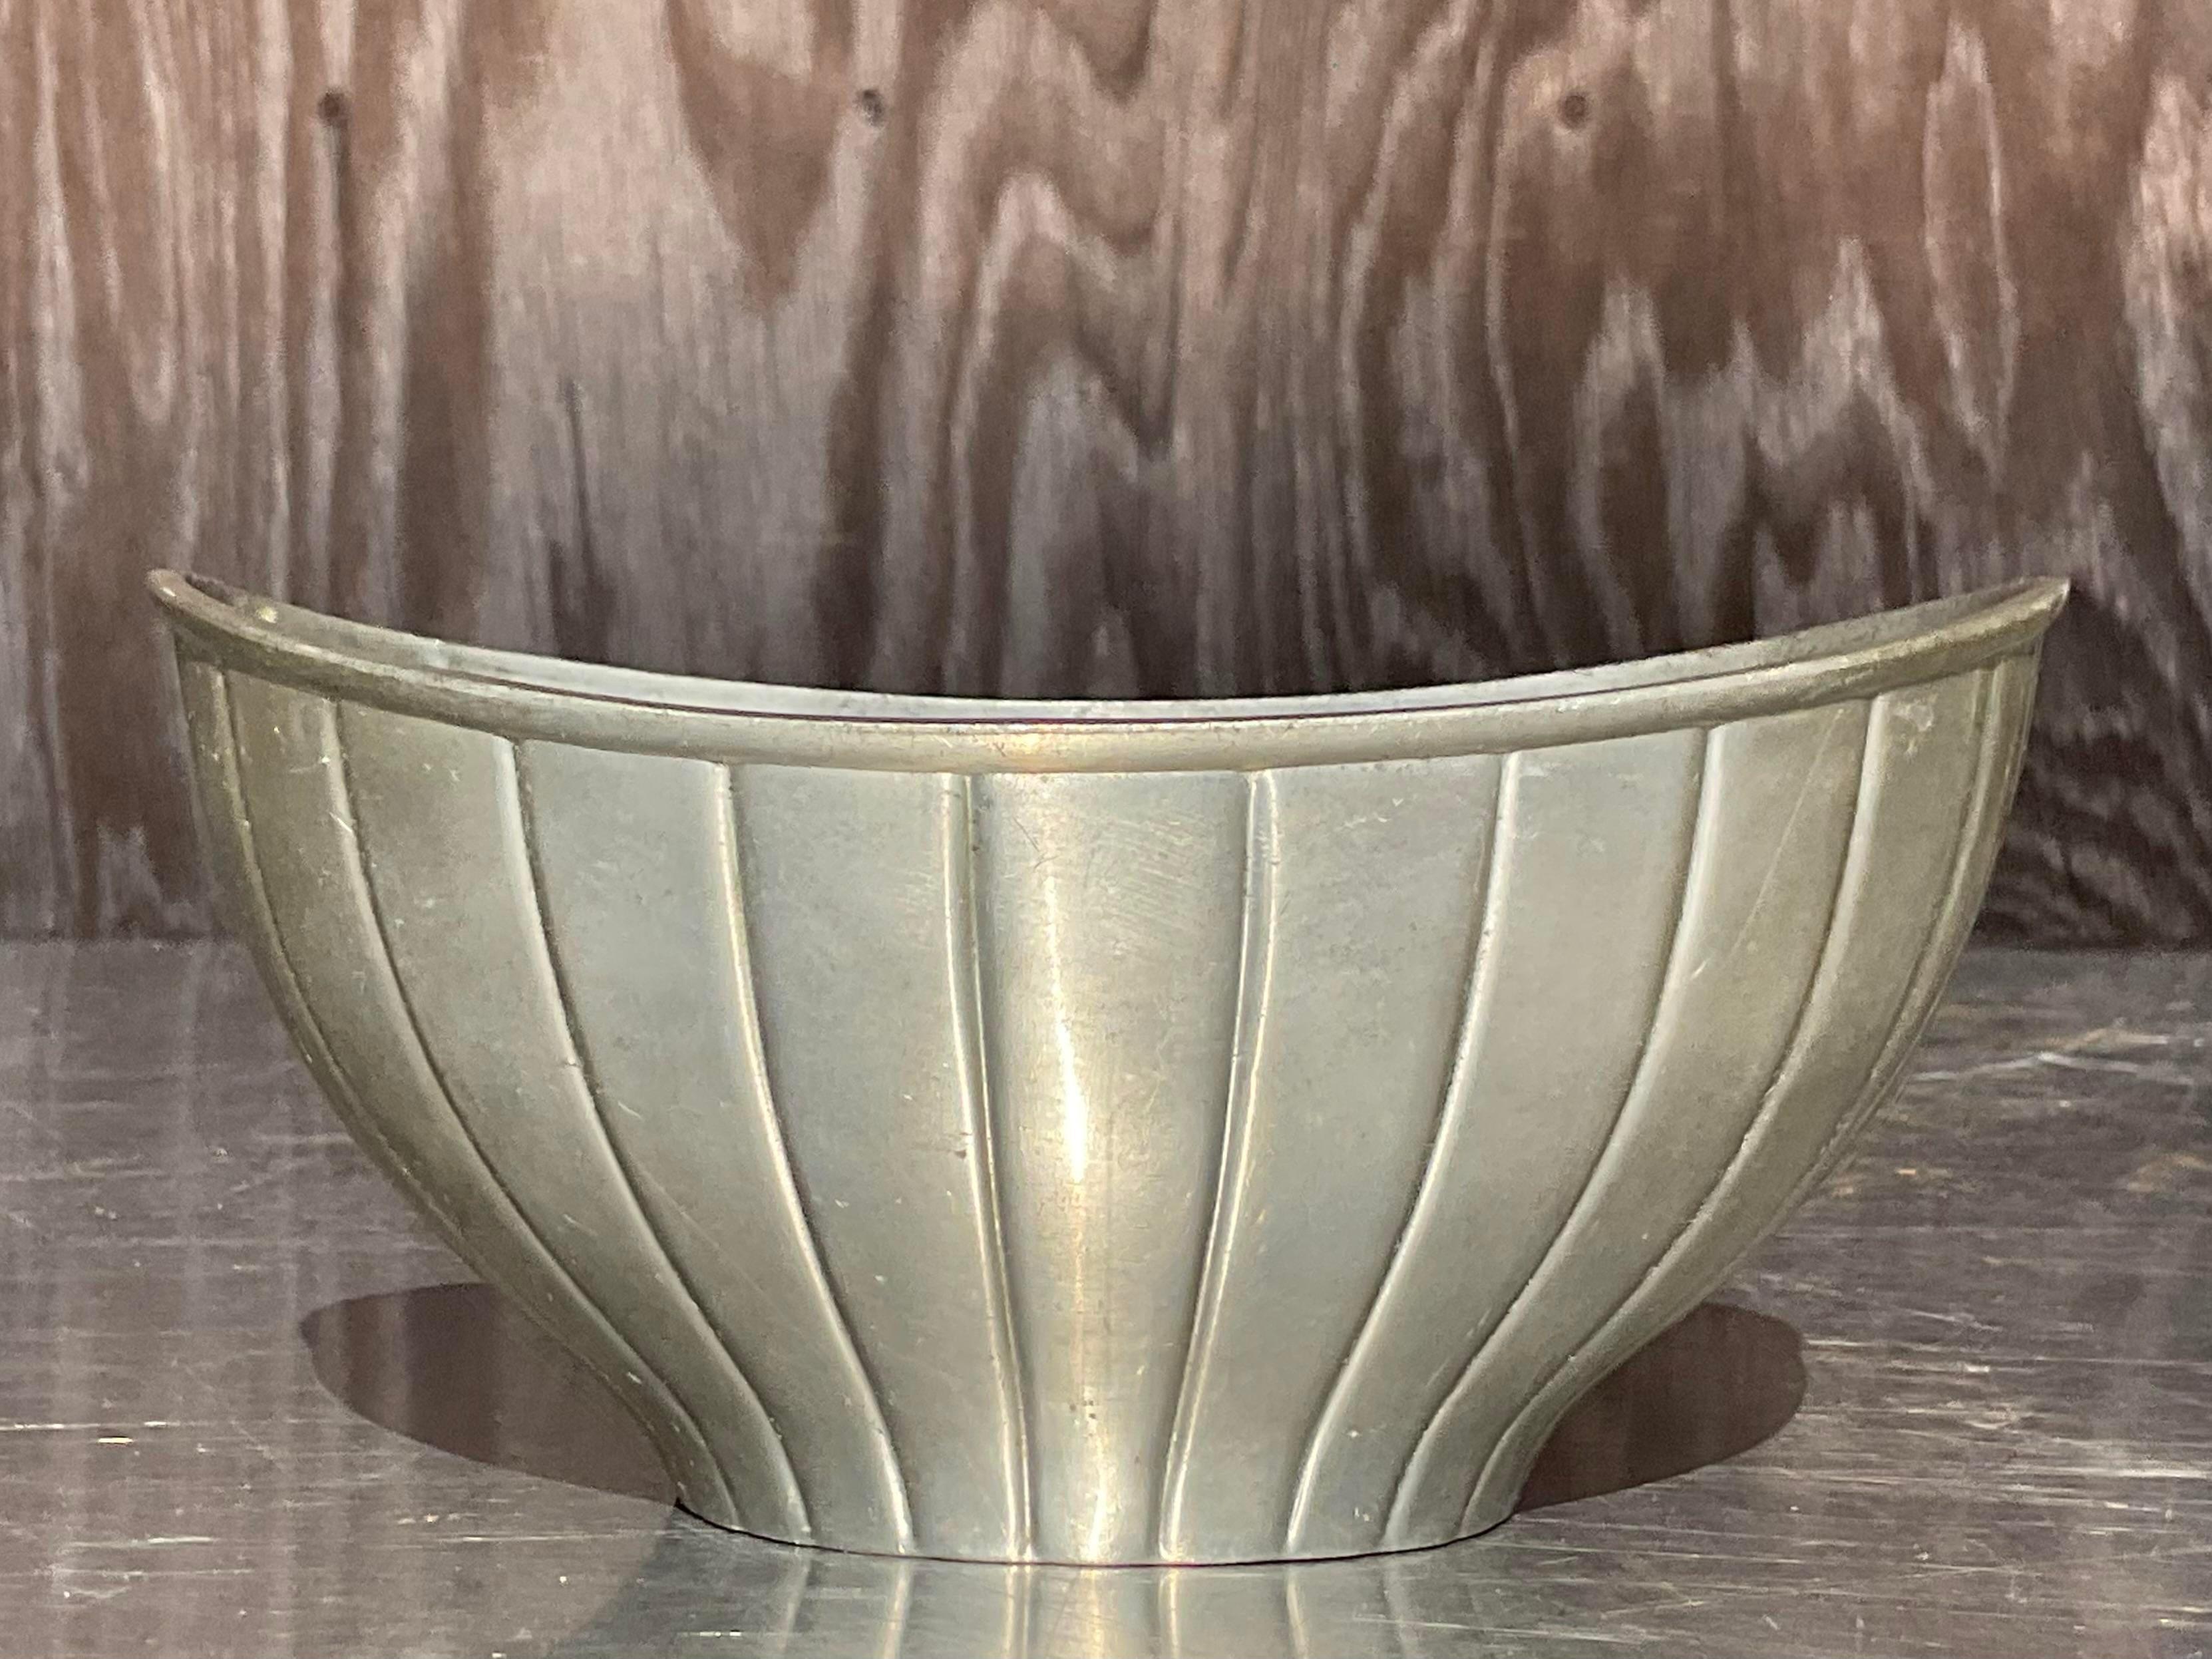 A fantastic vintage MCM pewter bowl. Made by the iconic Just Andersen and watermarked on the bottom. A stylish little catch all perfect in so many places. Acquired from a Palm Beach estate.